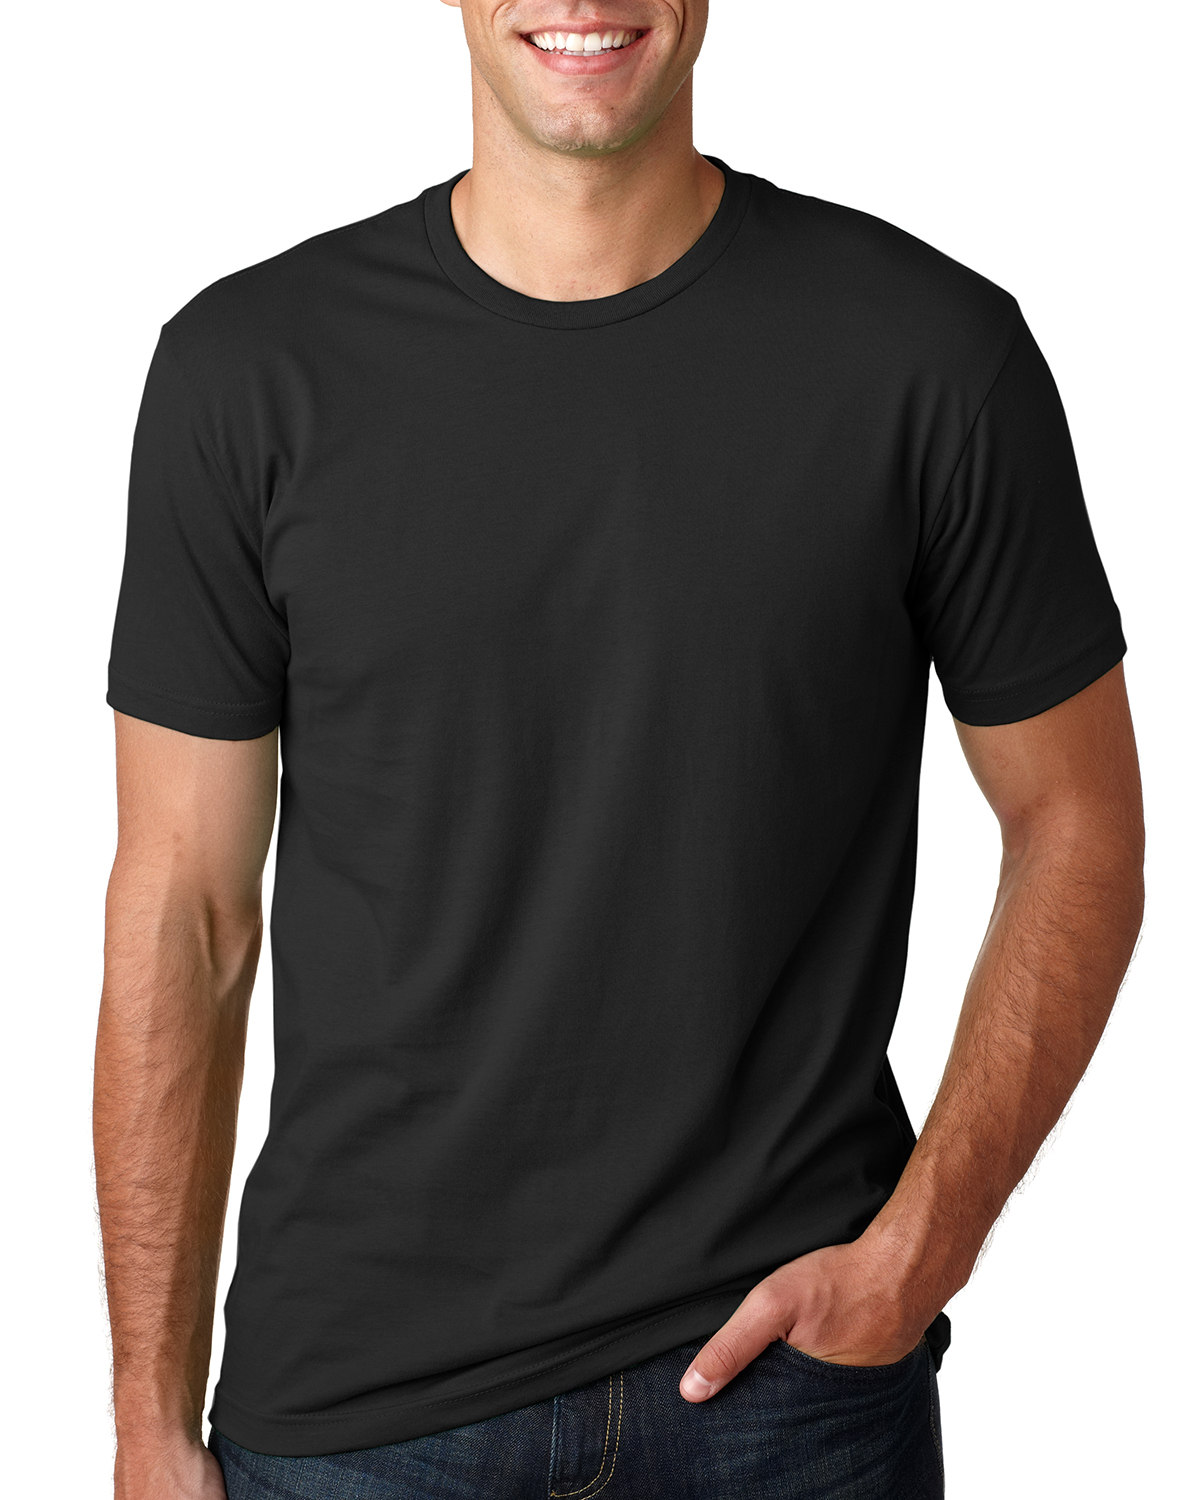 Details about   New Lowrance Dry Fit T-shirt Look!! 3X